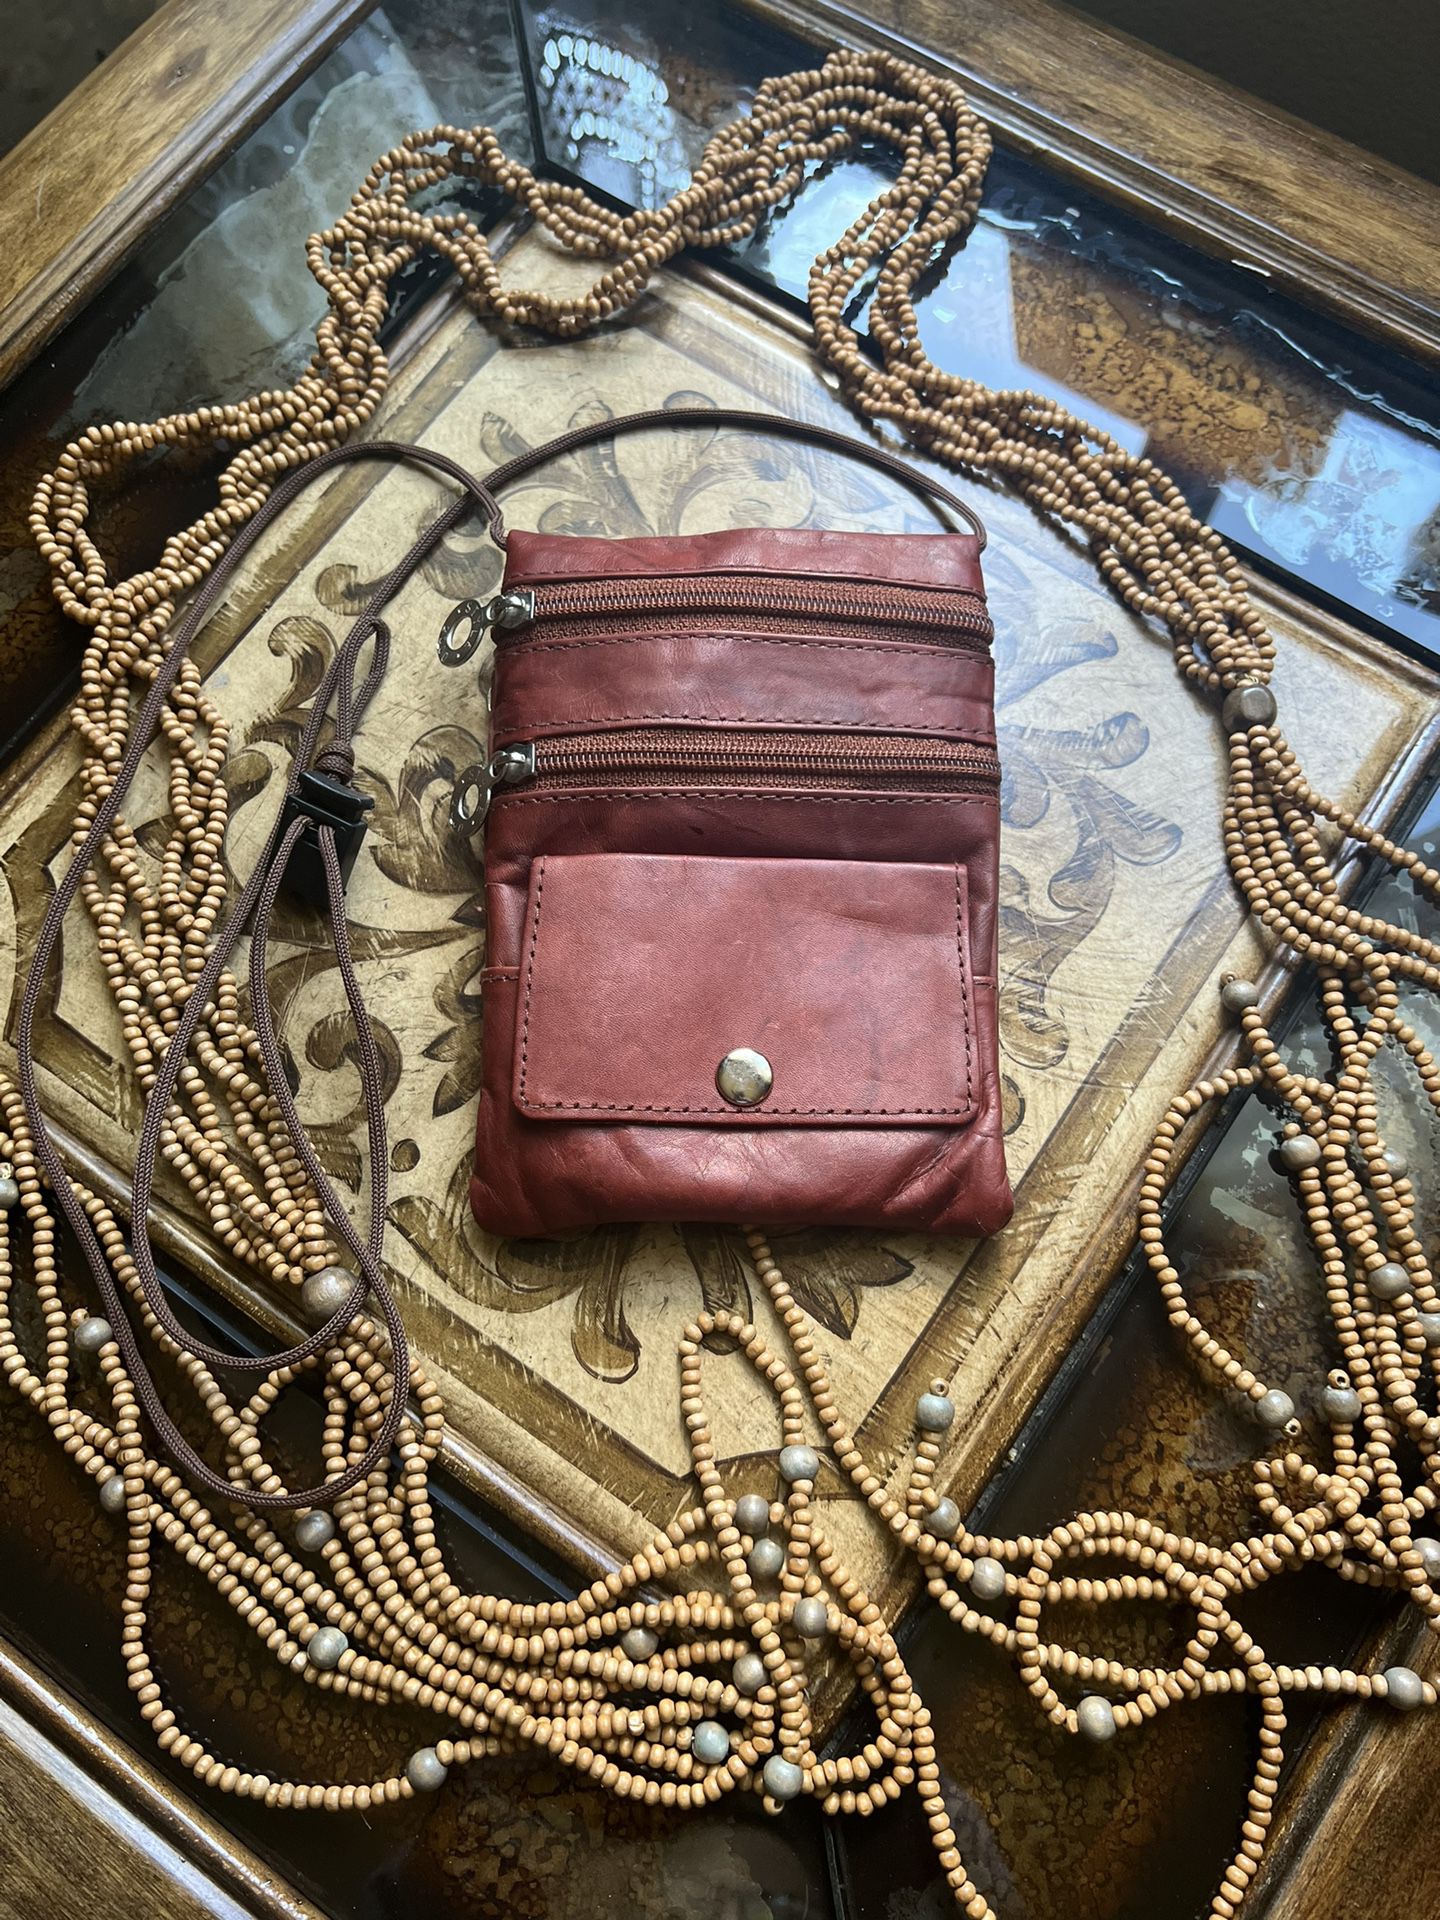 Super sharp, soft leather purse for wallet and cell phone usage and great condition says style 2000 has adjustable strap see photos